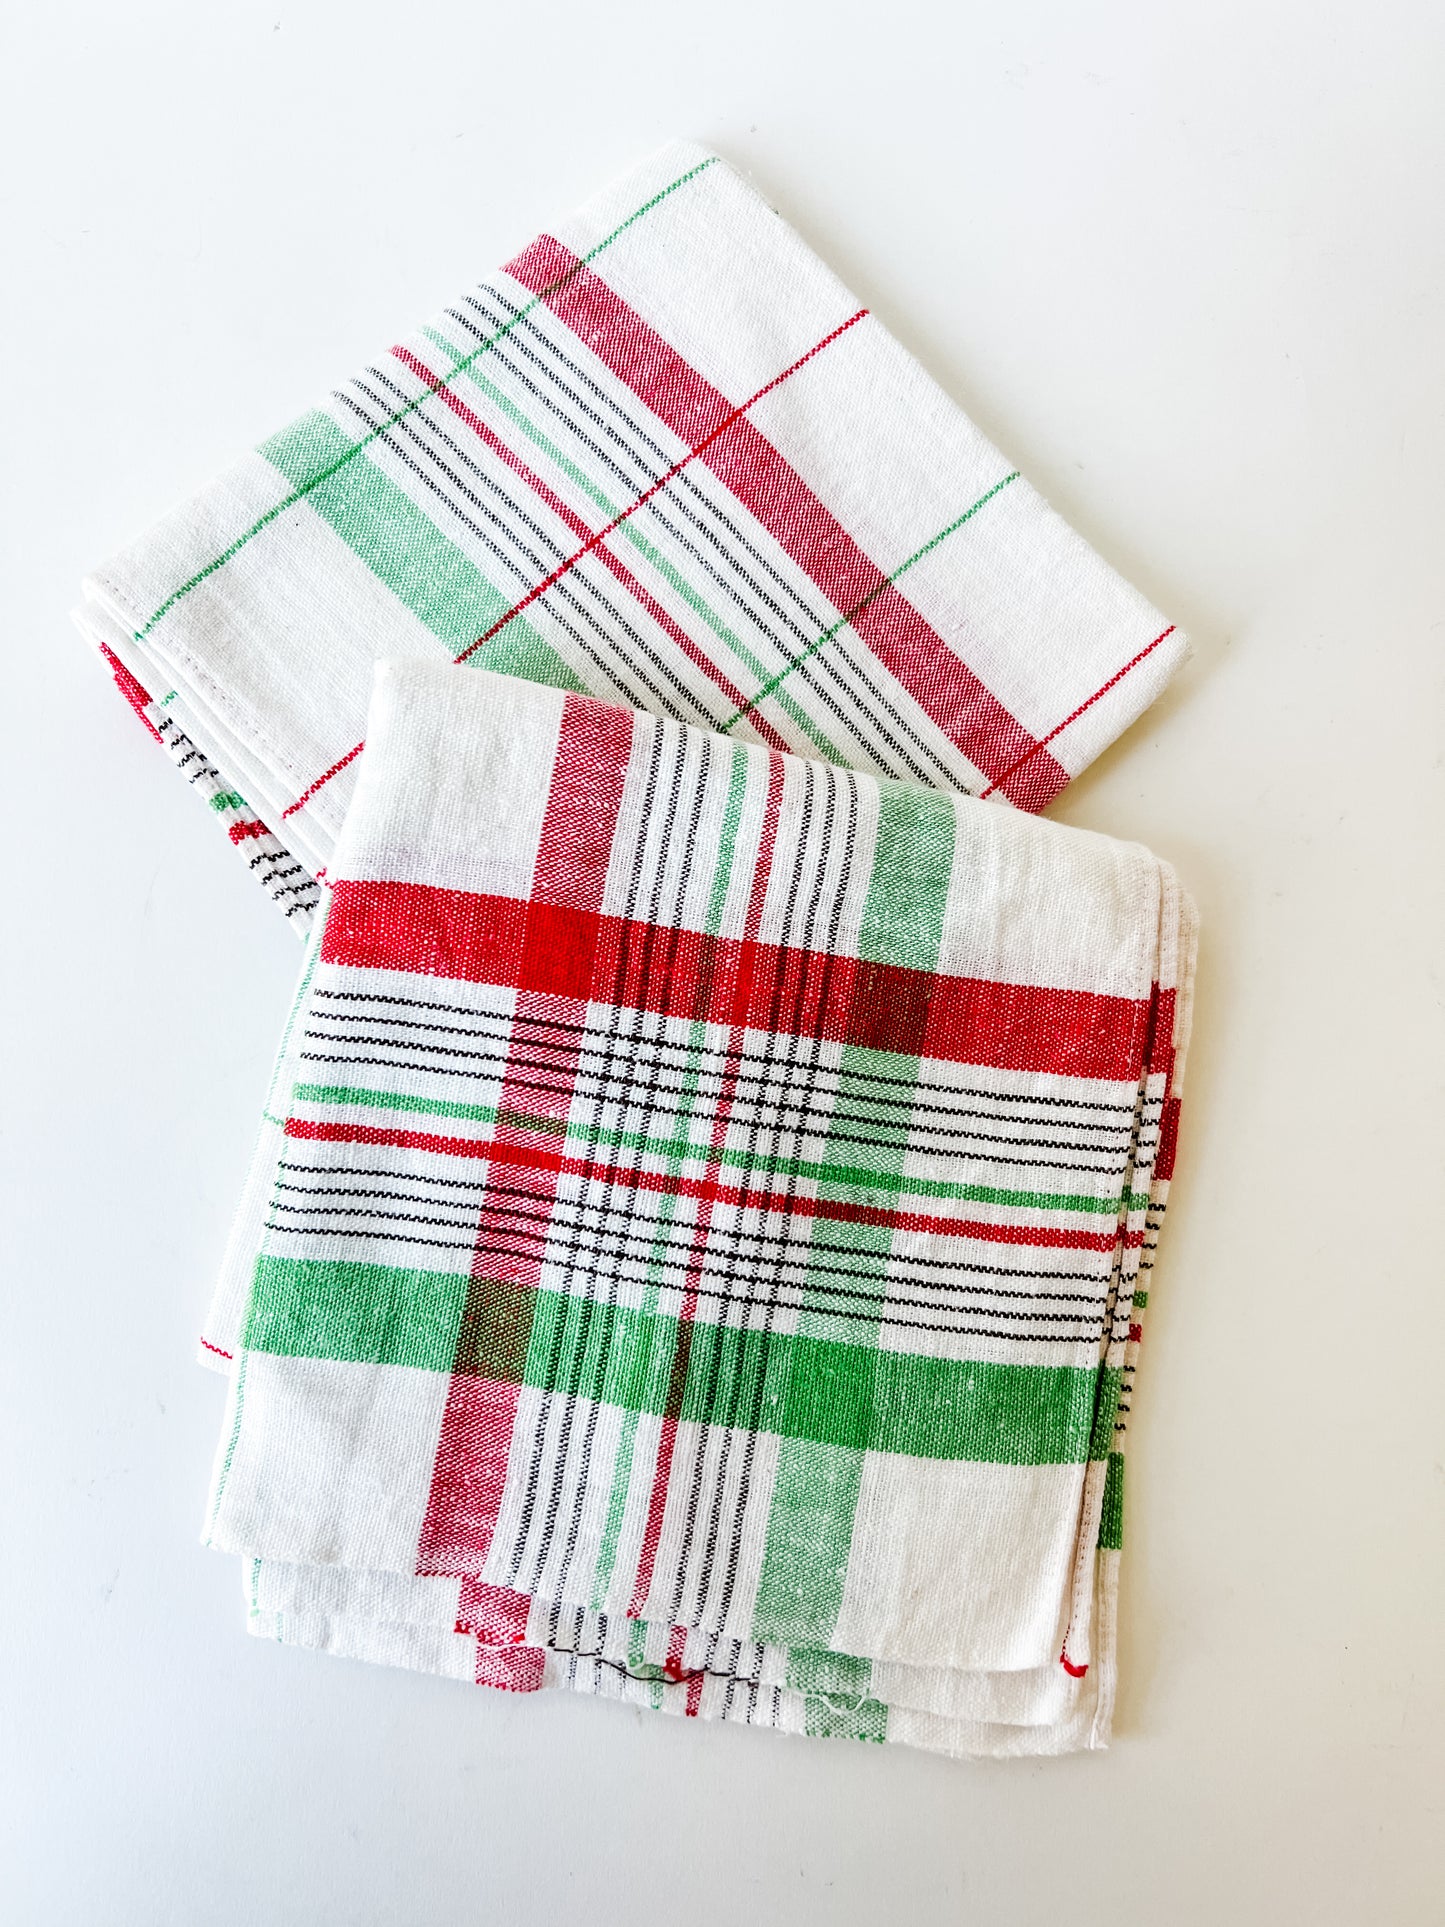 Vintage French Tea Towels (red and green plaid)